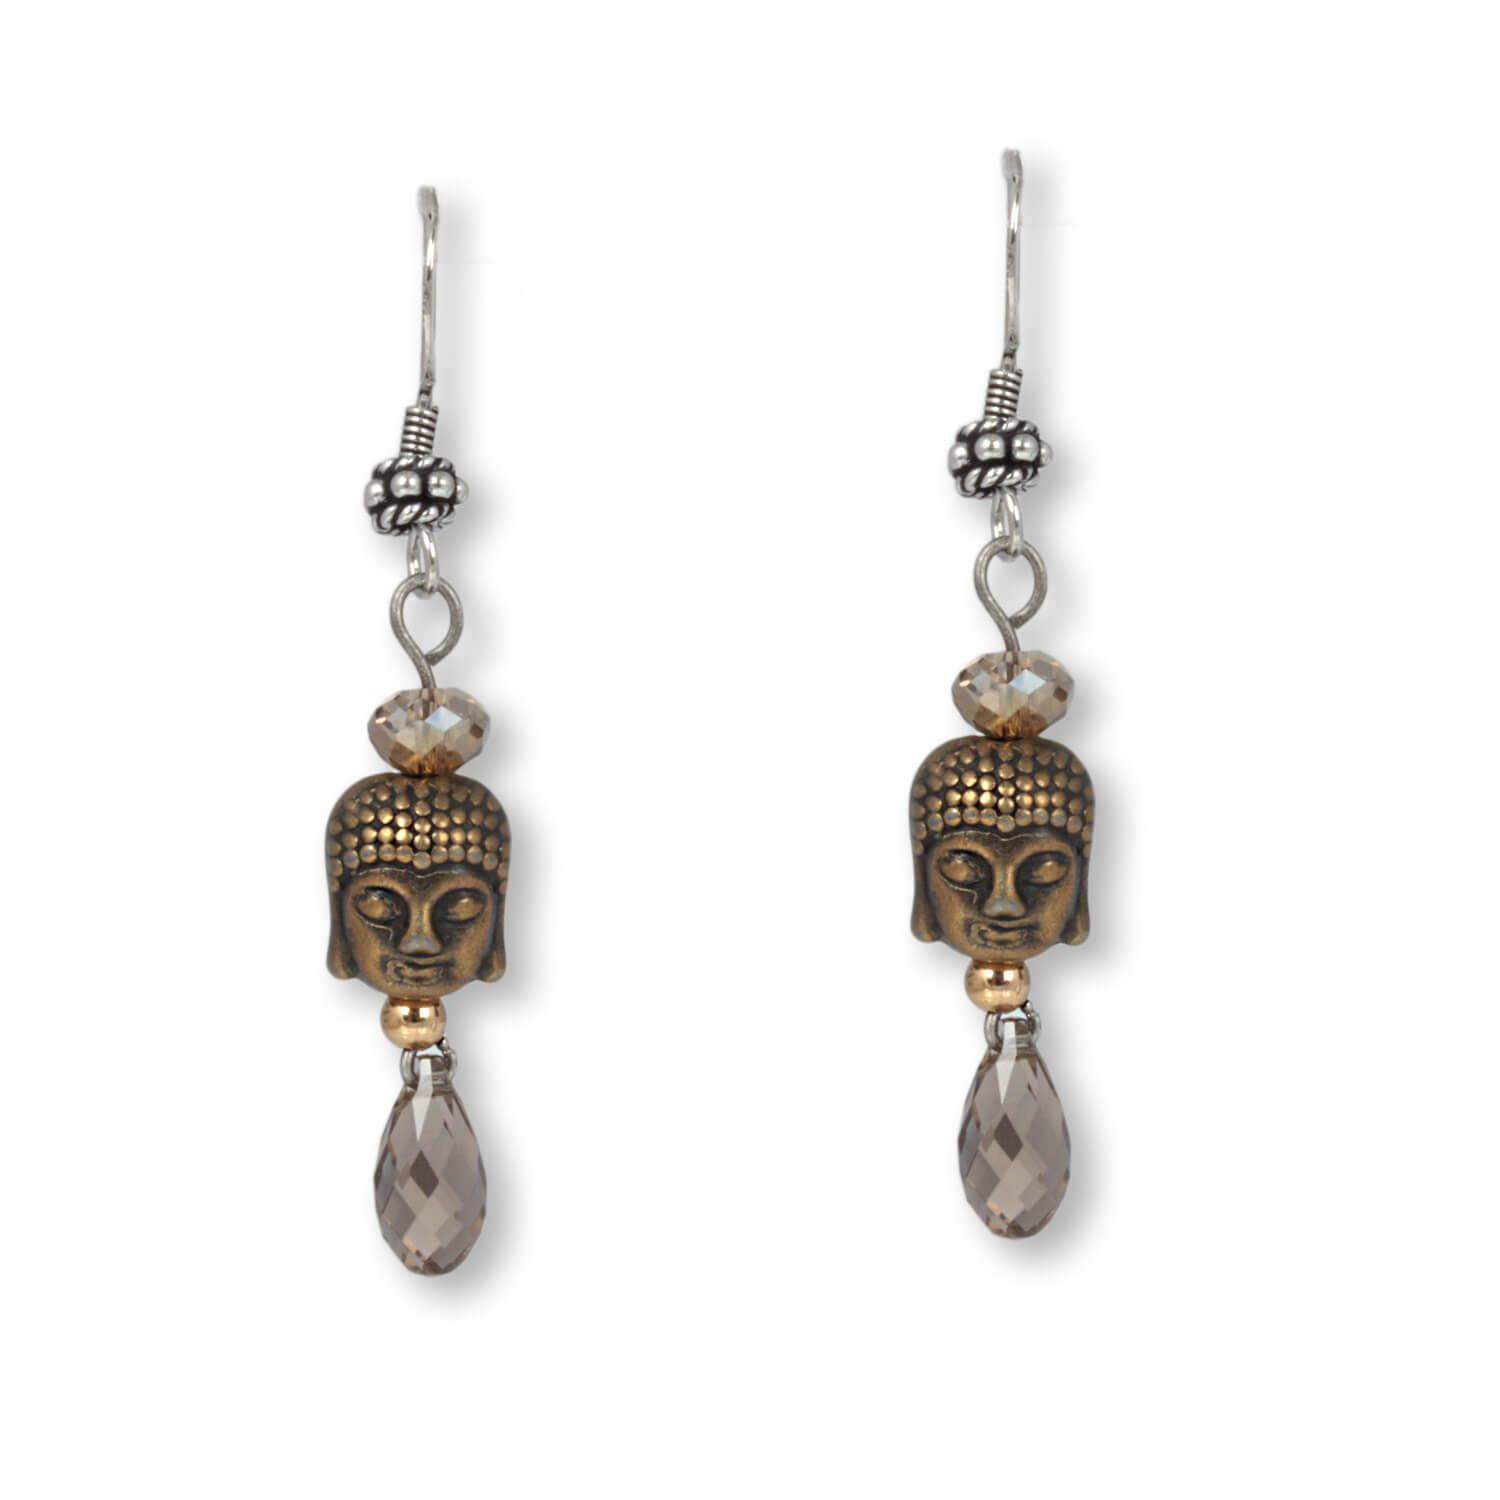 Golden-Shadow Bronze - Buddha earrings with sparkling crystals